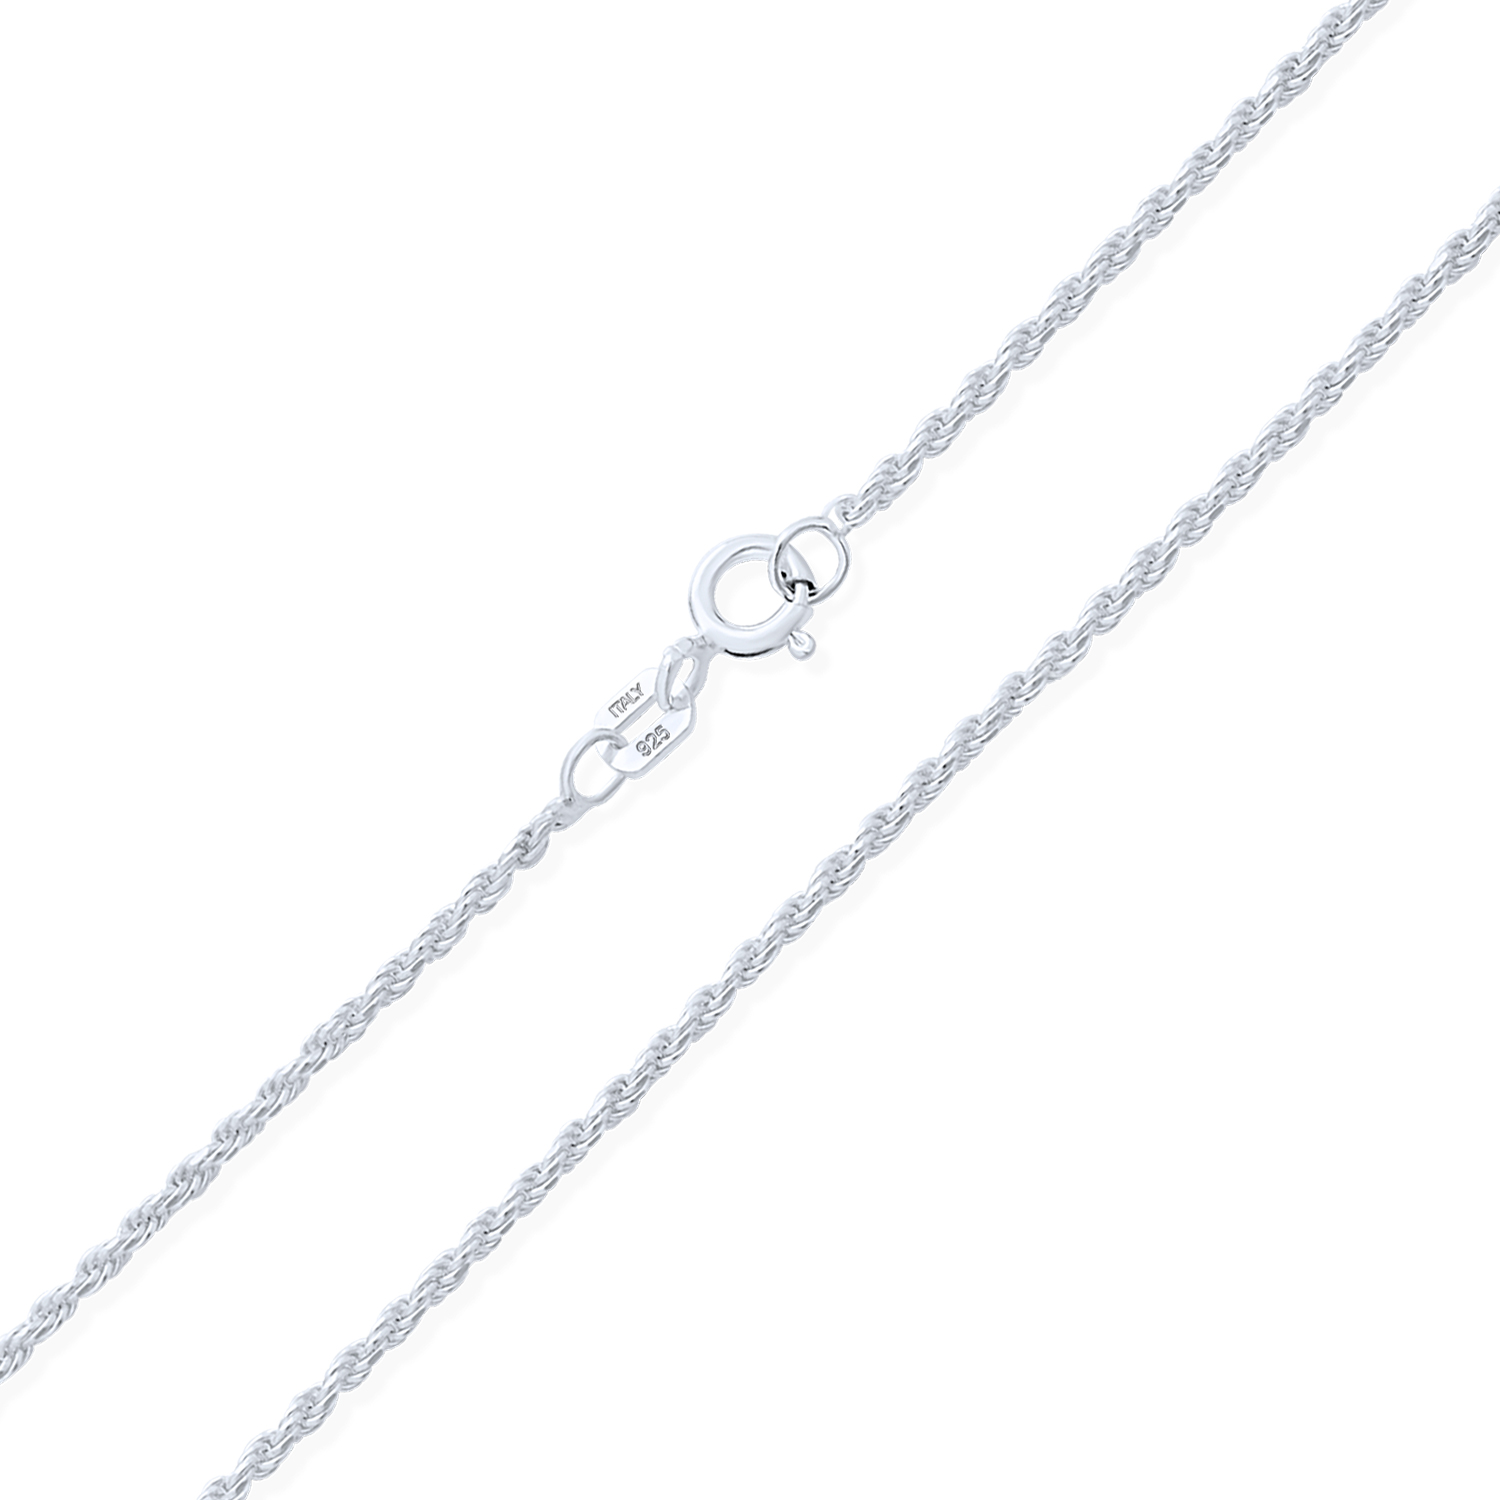 Thin 1.1mm Rope chain .925 solid sterling silver Sterling Silver Chain...Italian Rope chain Thick 1.8mm Rope chain 16 to 30 long